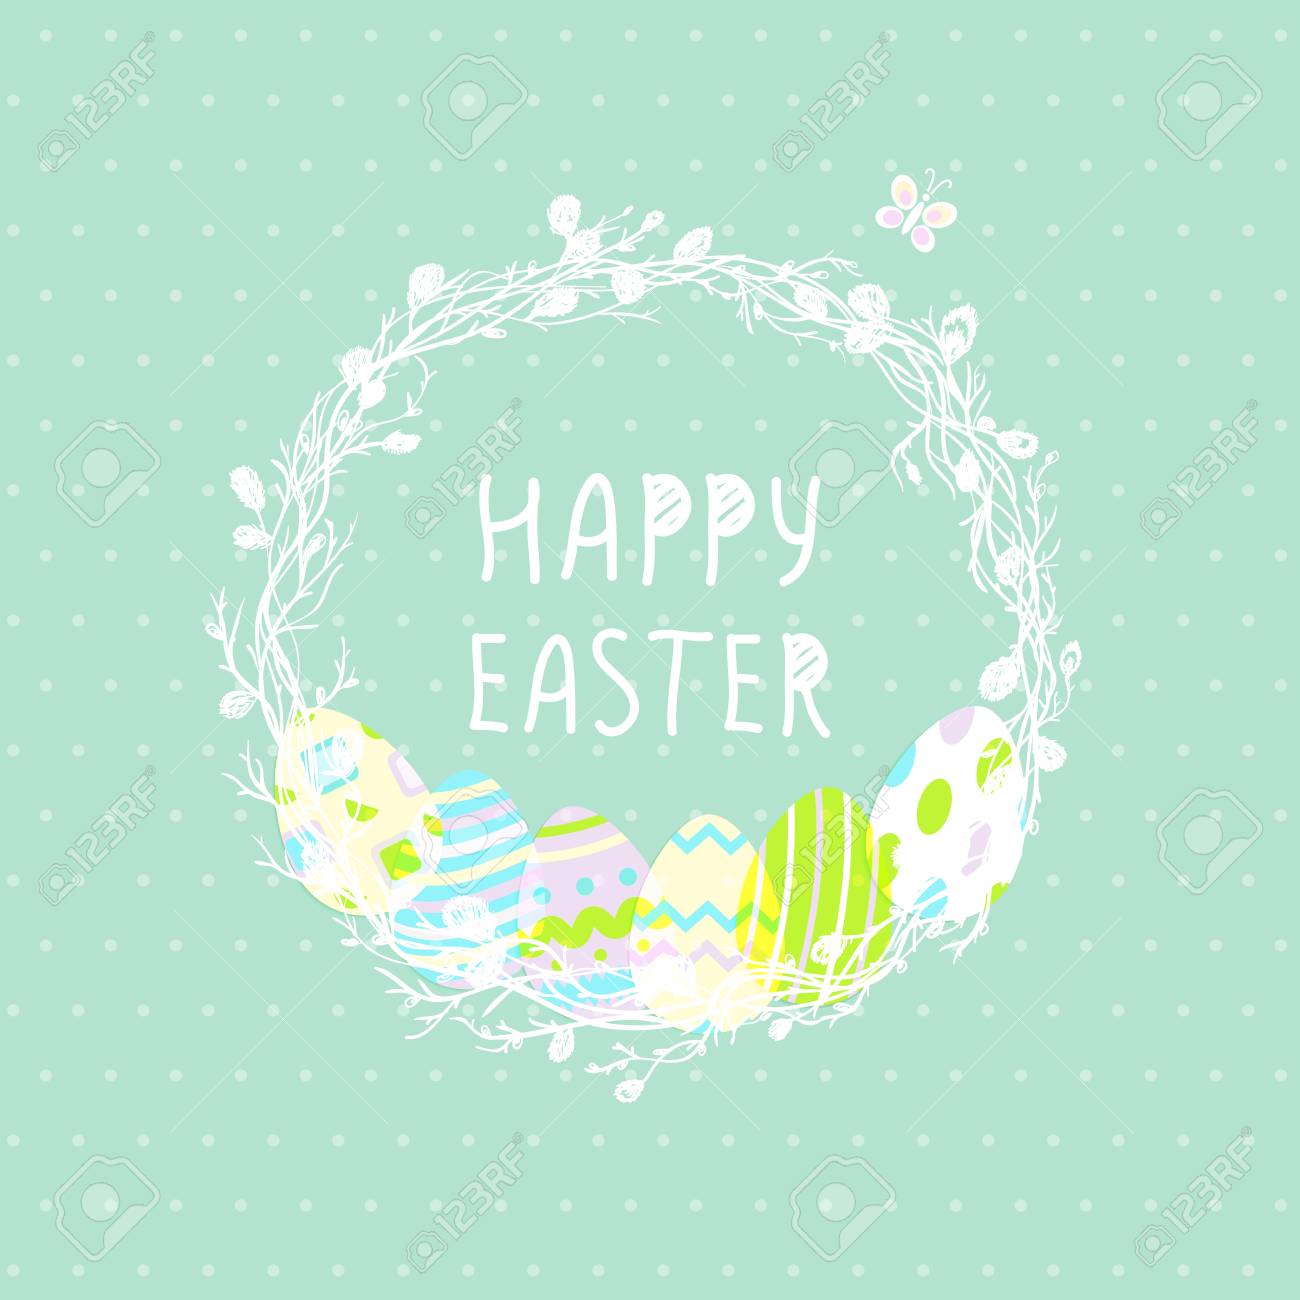 Happy easter greeting card with eggs and leaves - Easter